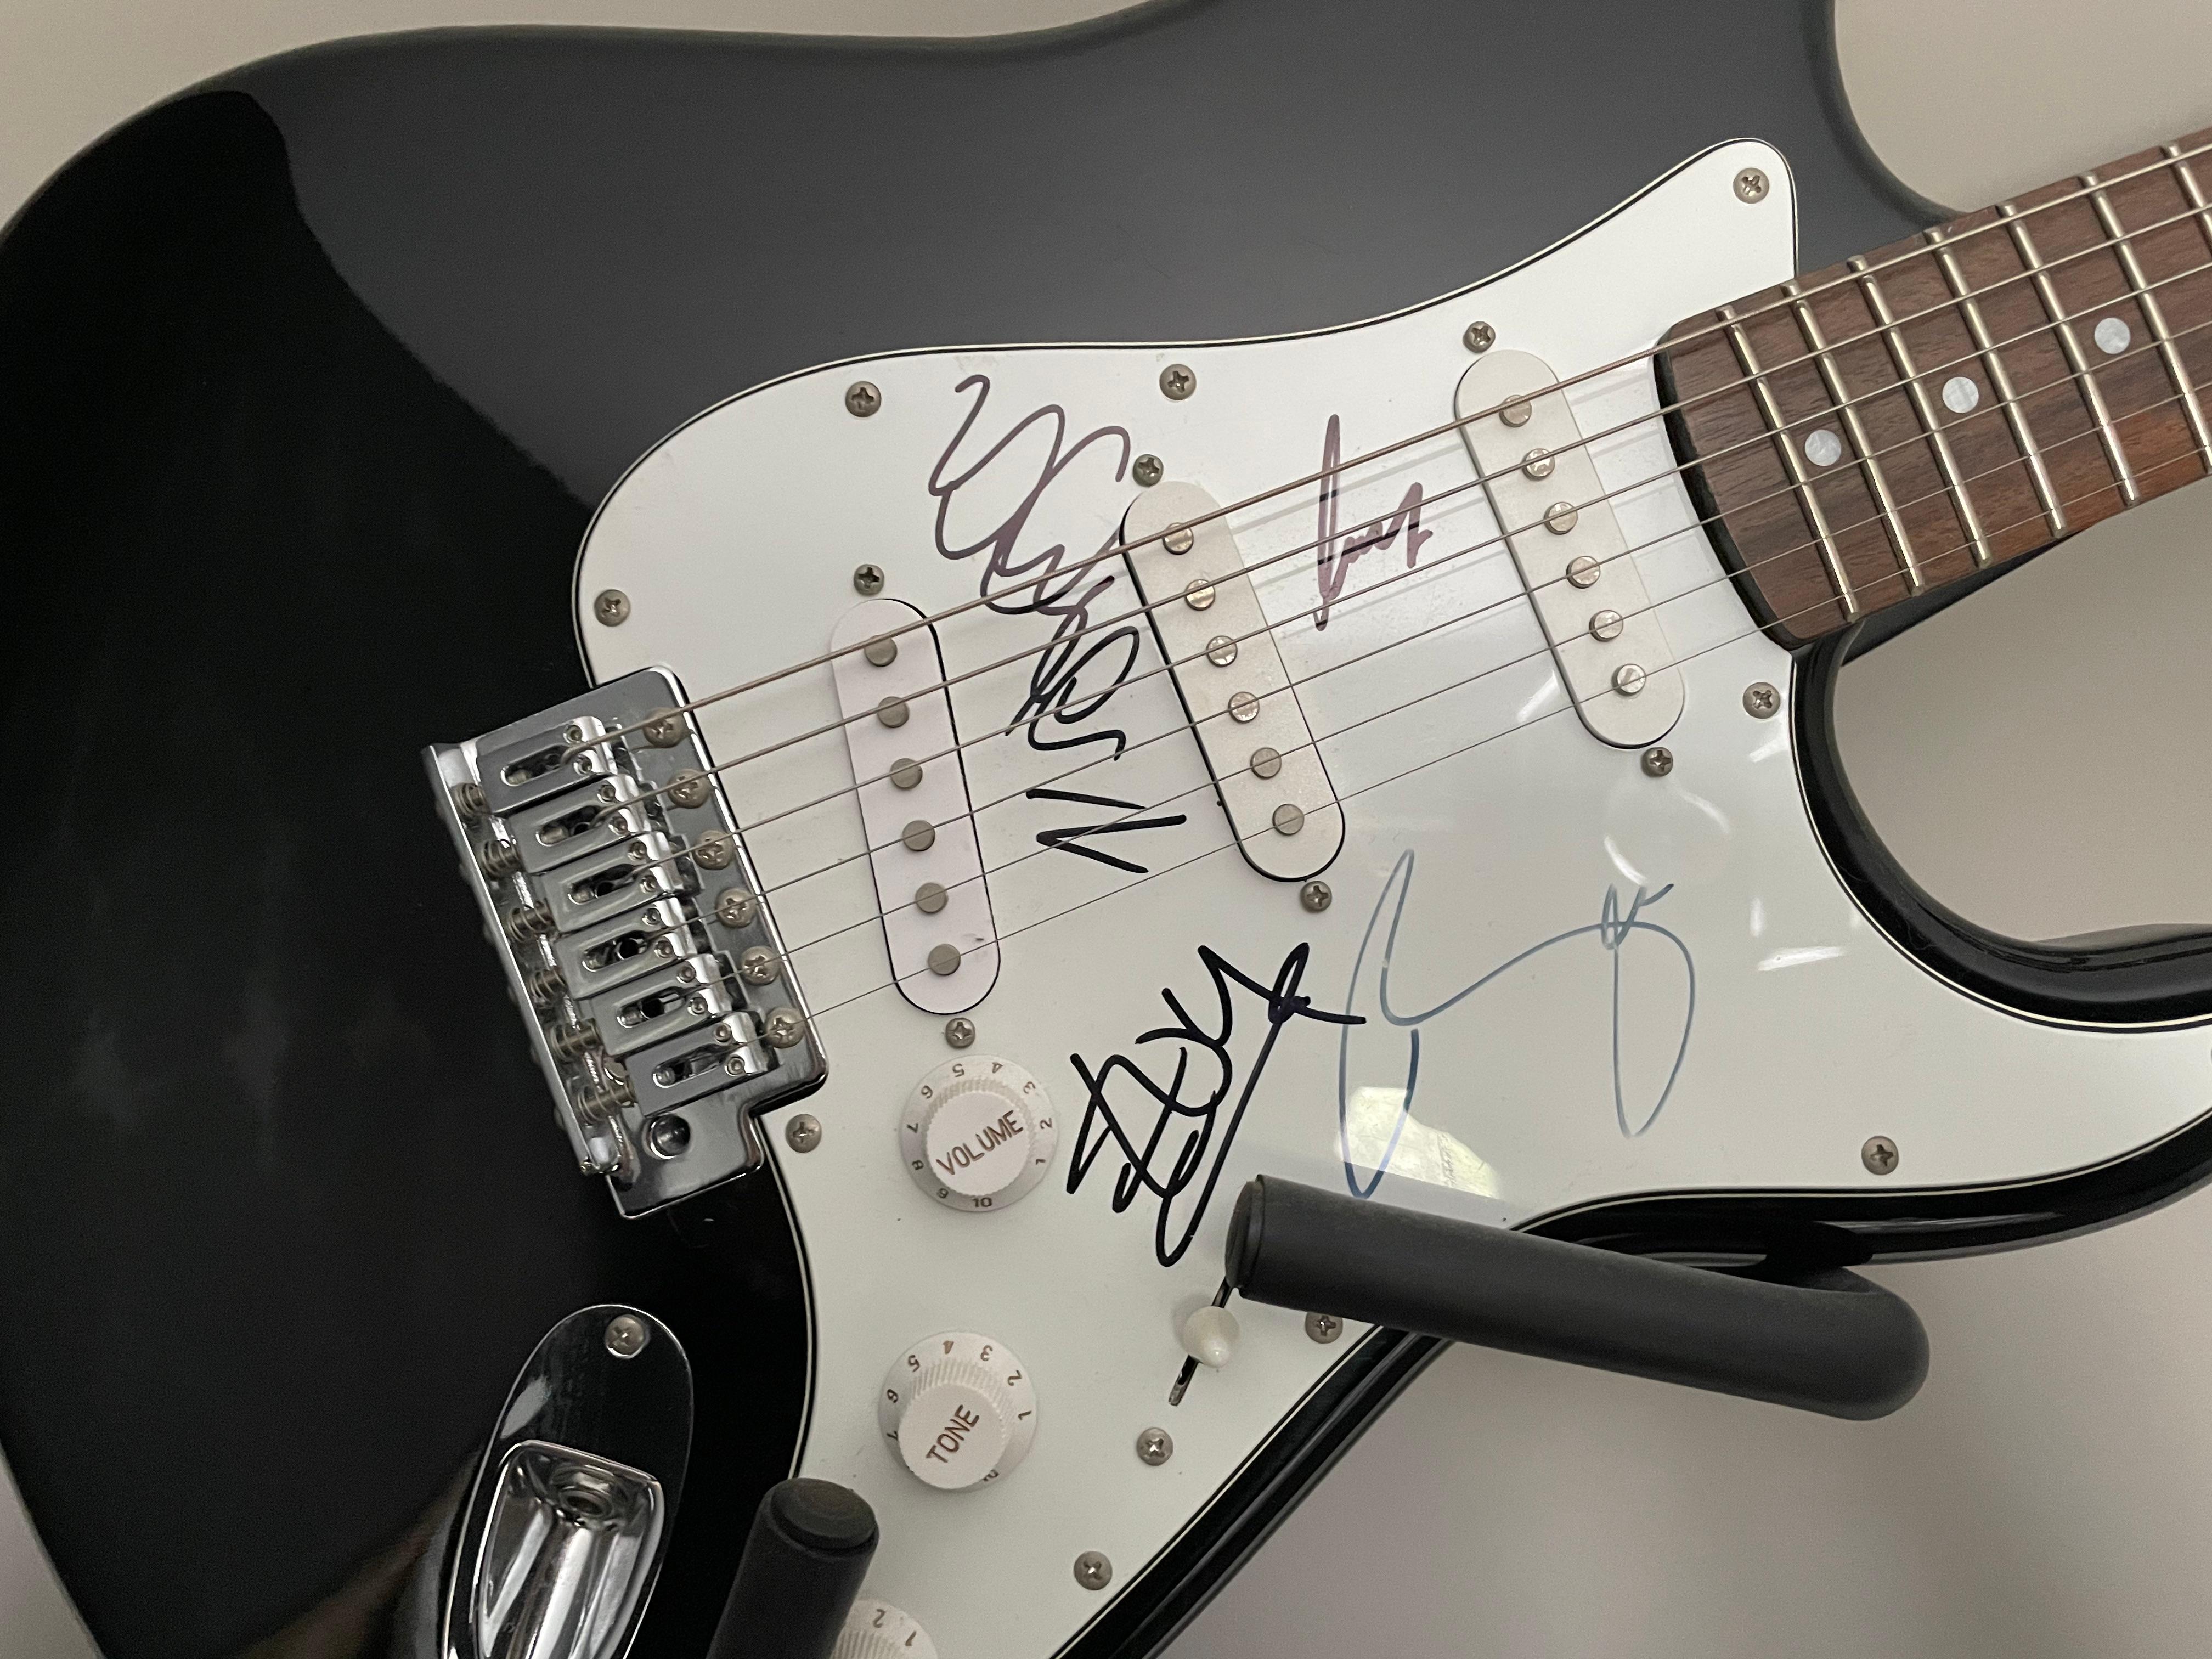 A U2 fully-signed crafter Cruzer electric guitar
A fully working black electric Crafter Cruzer guitar.

Autographed by all 4 members of U2; Bono (1960- ), The Edge (1961- ), Larry Mullen (1961- ) and Adam Clayton (1960- ) in bold black ink on the